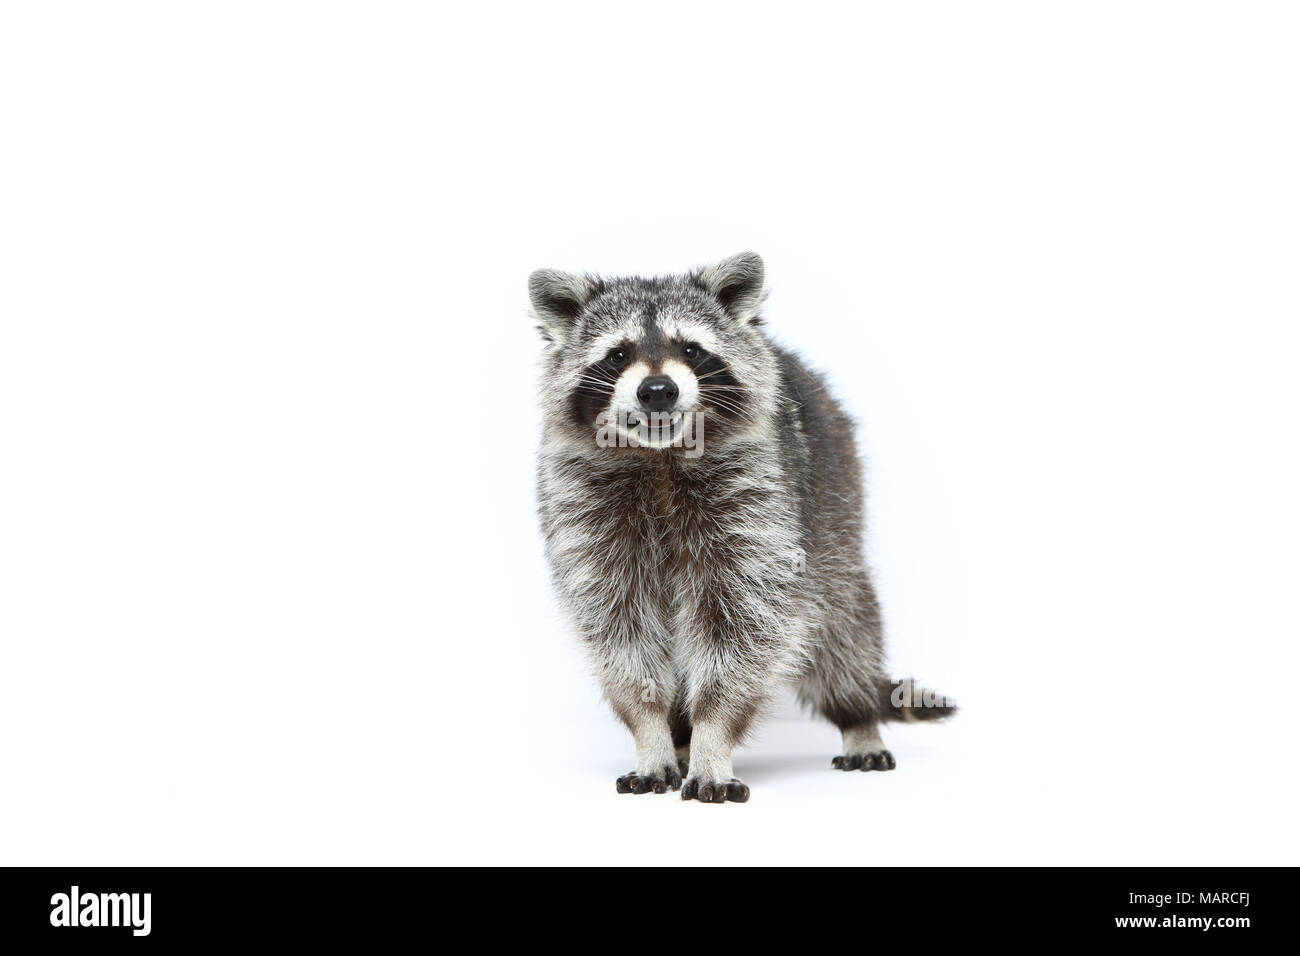 Raccoon (Procyon lotor). Adult standing, seen head-on. Studio picture against a white background. Germany Stock Photo